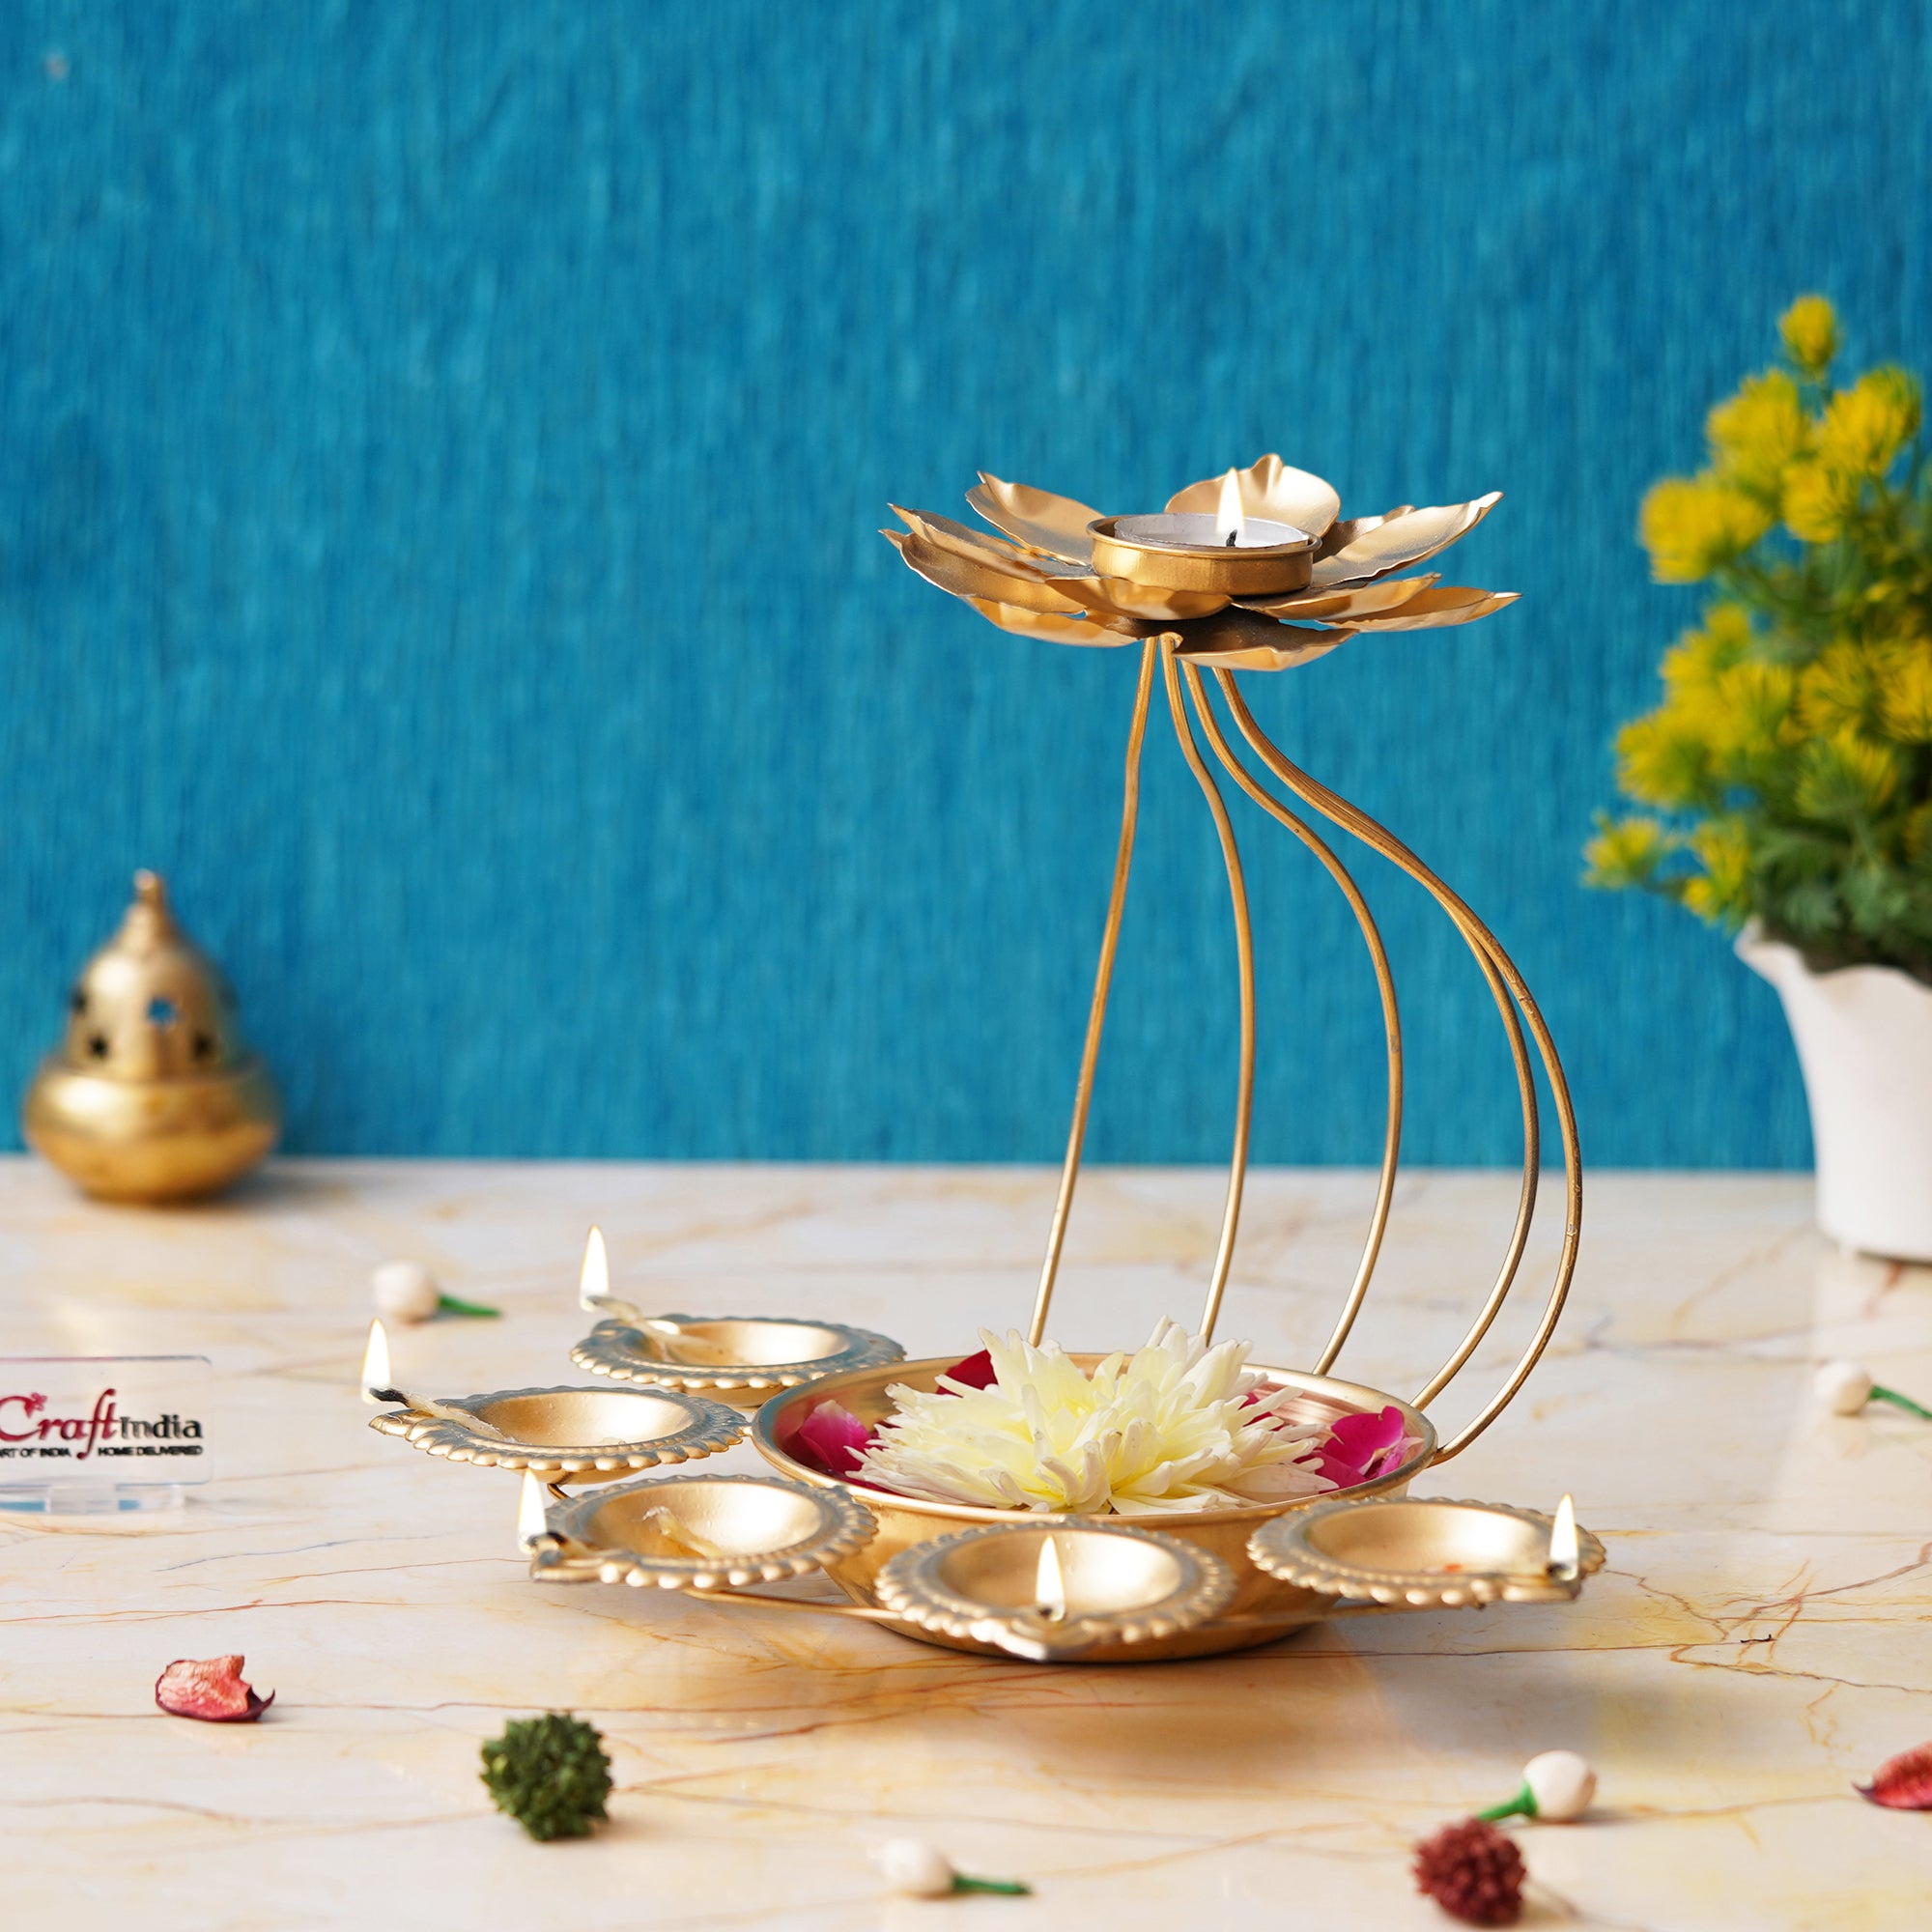 Golden Metal Handcrafted Lotus Shaped Decorative Urli with Tea Light Candle Holder